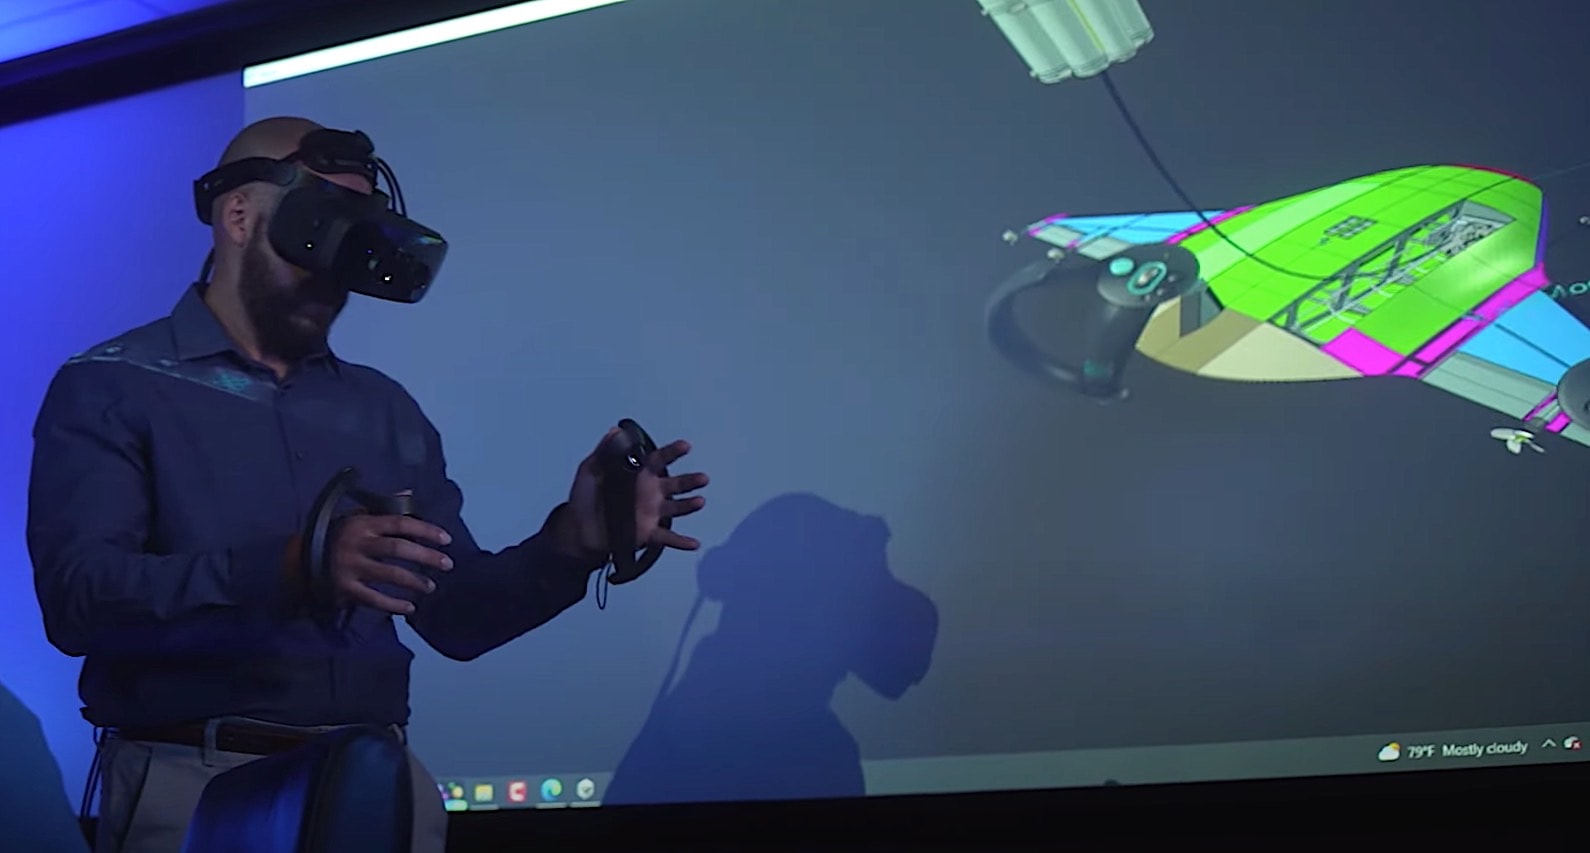 New Video Shows Military Manta Ray Drone, VR Plays a Role